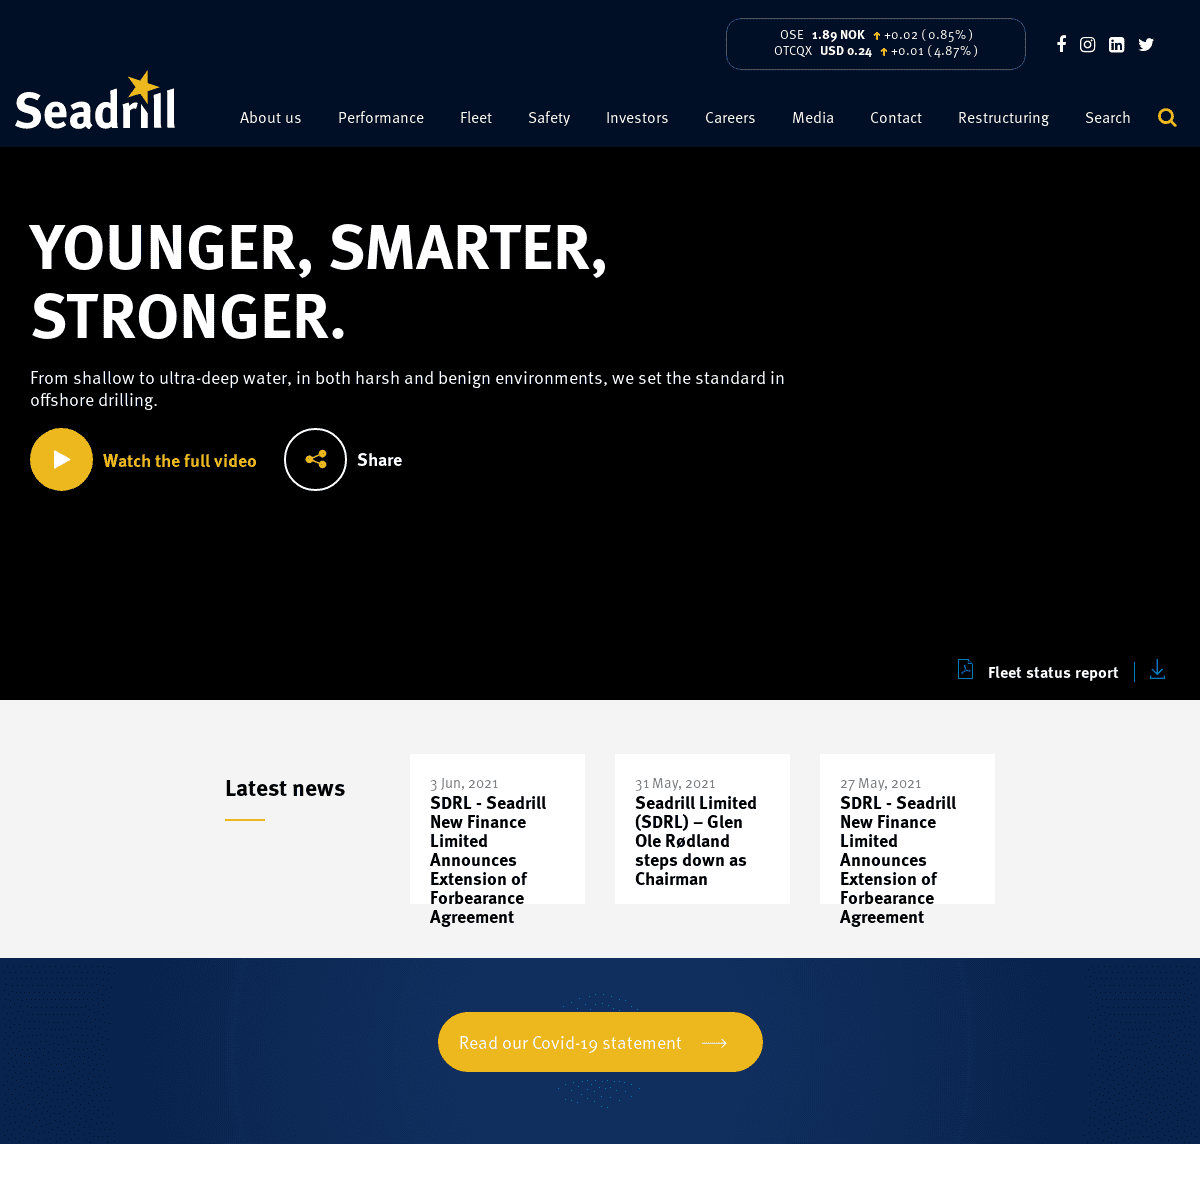 A complete backup of https://seadrill.com